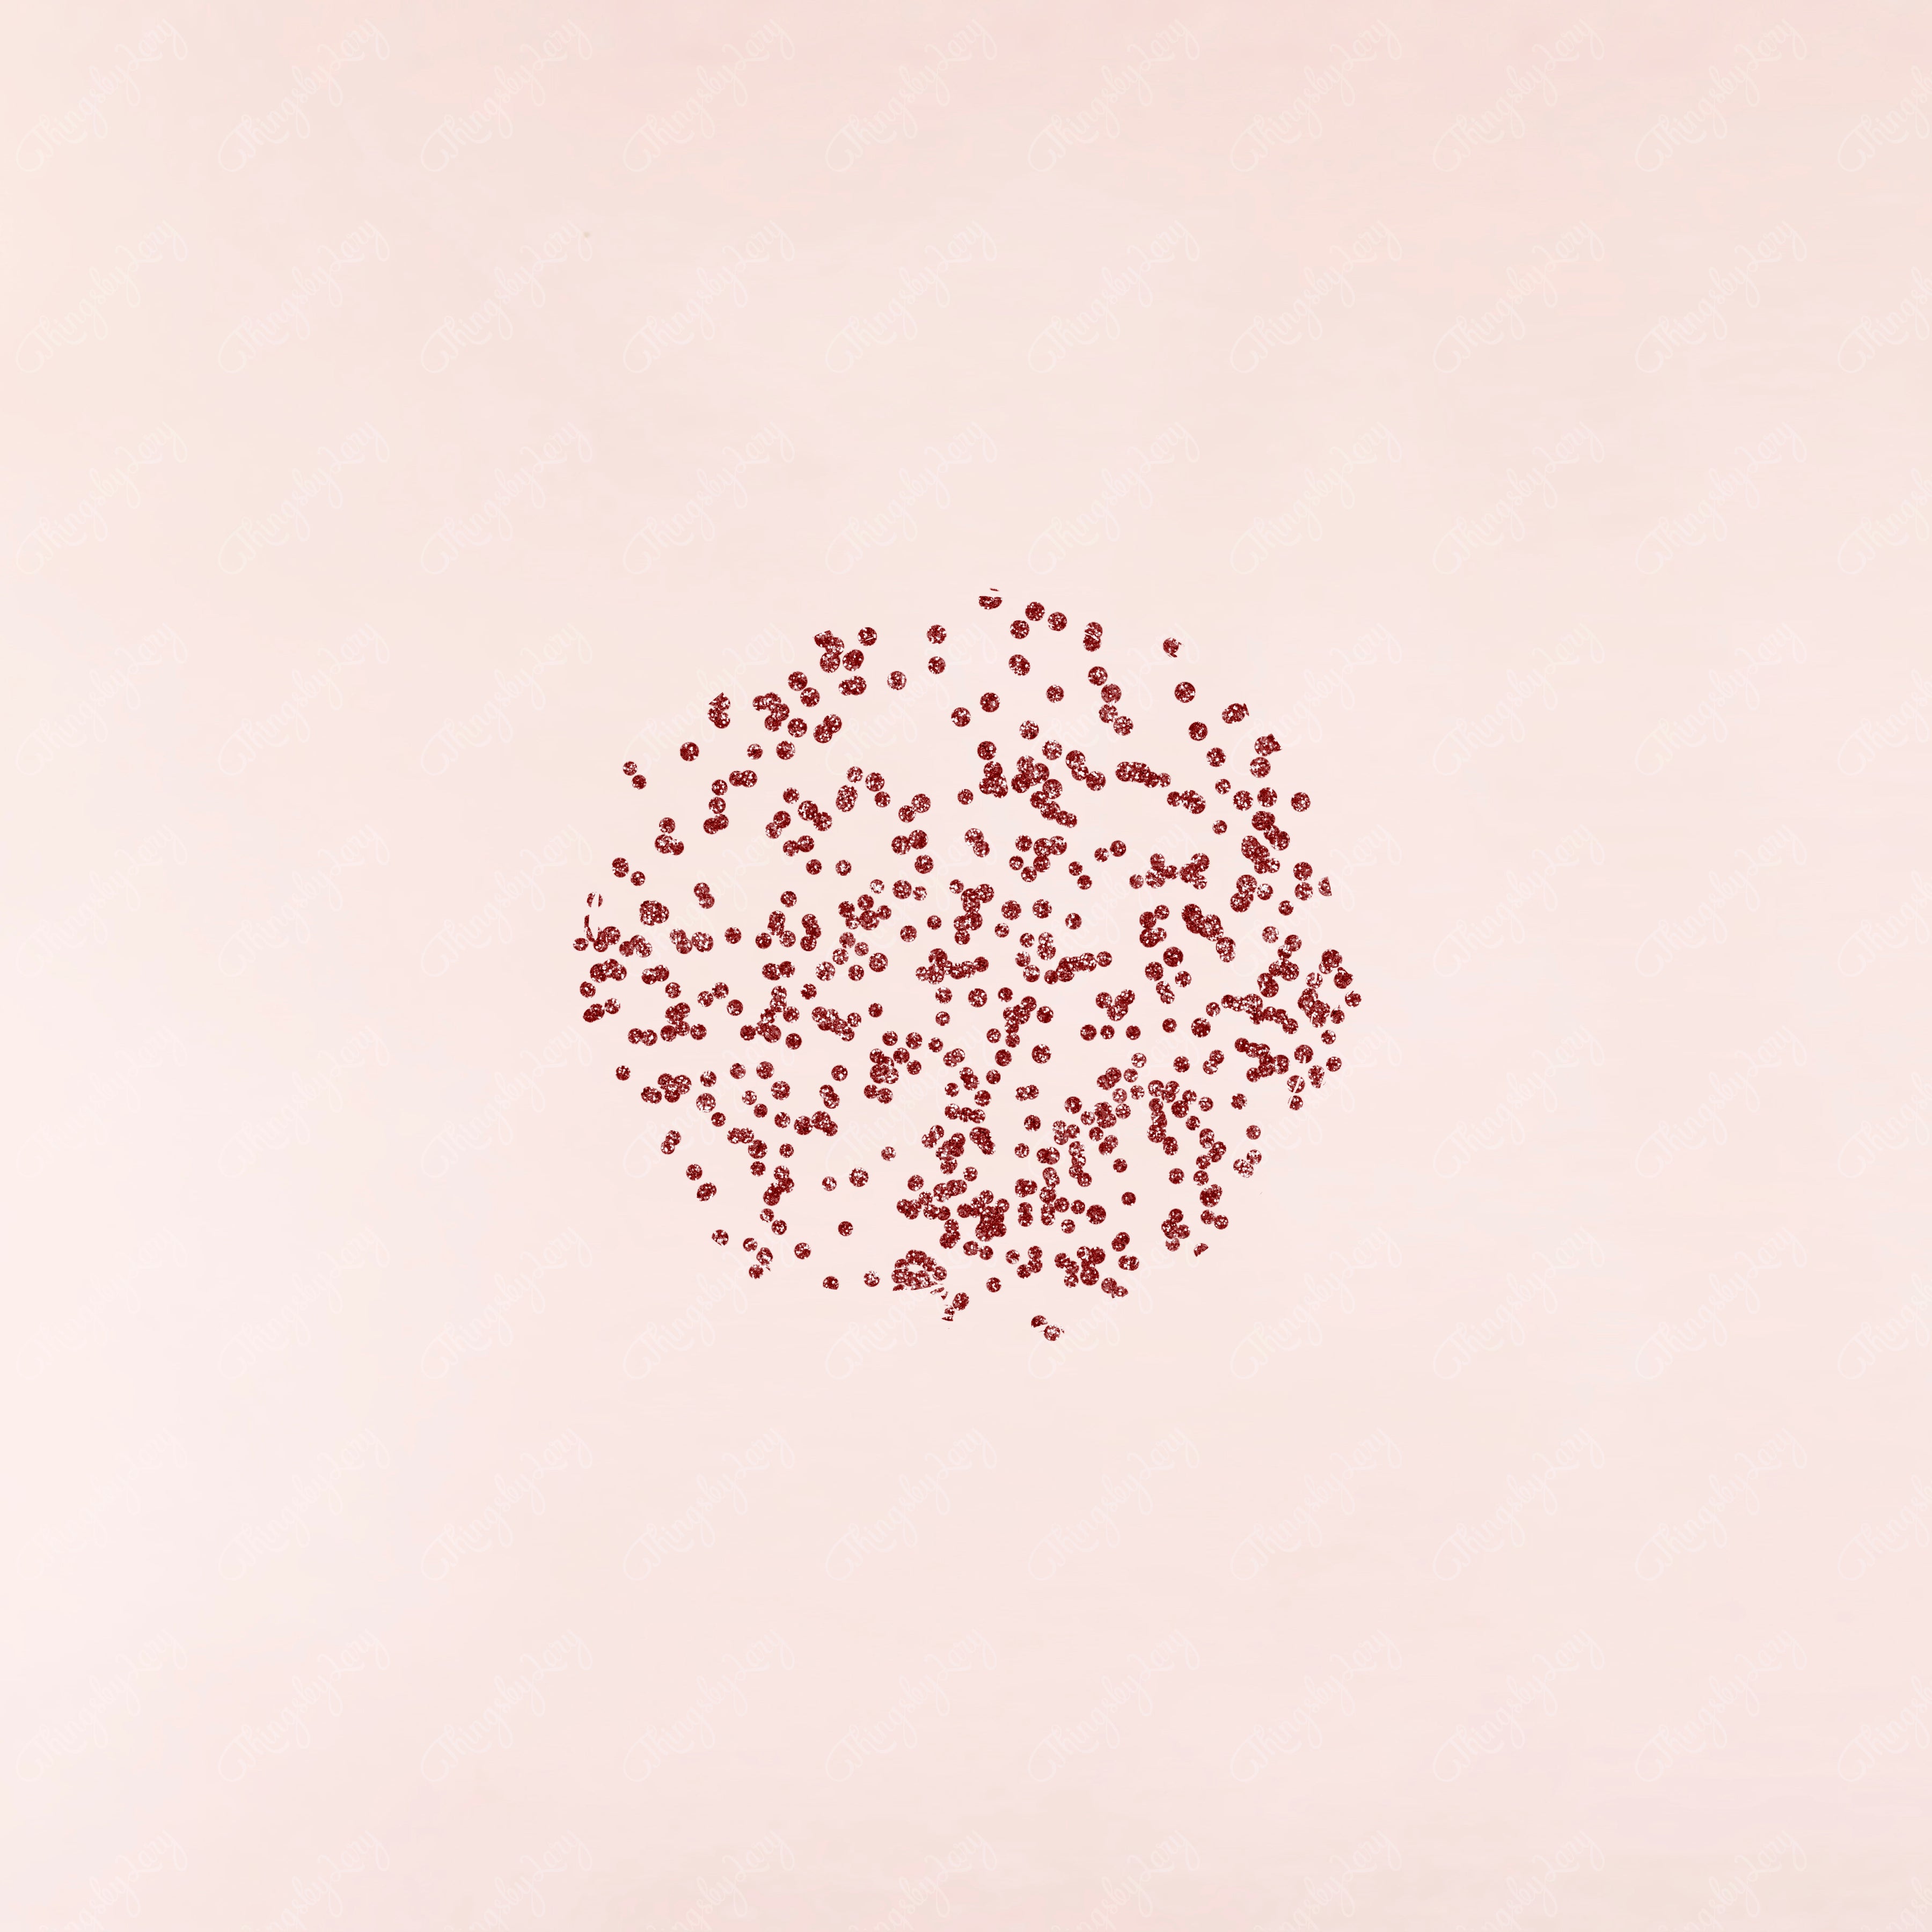 70 Maroon Glitter Particles Set PNG Overlay Images